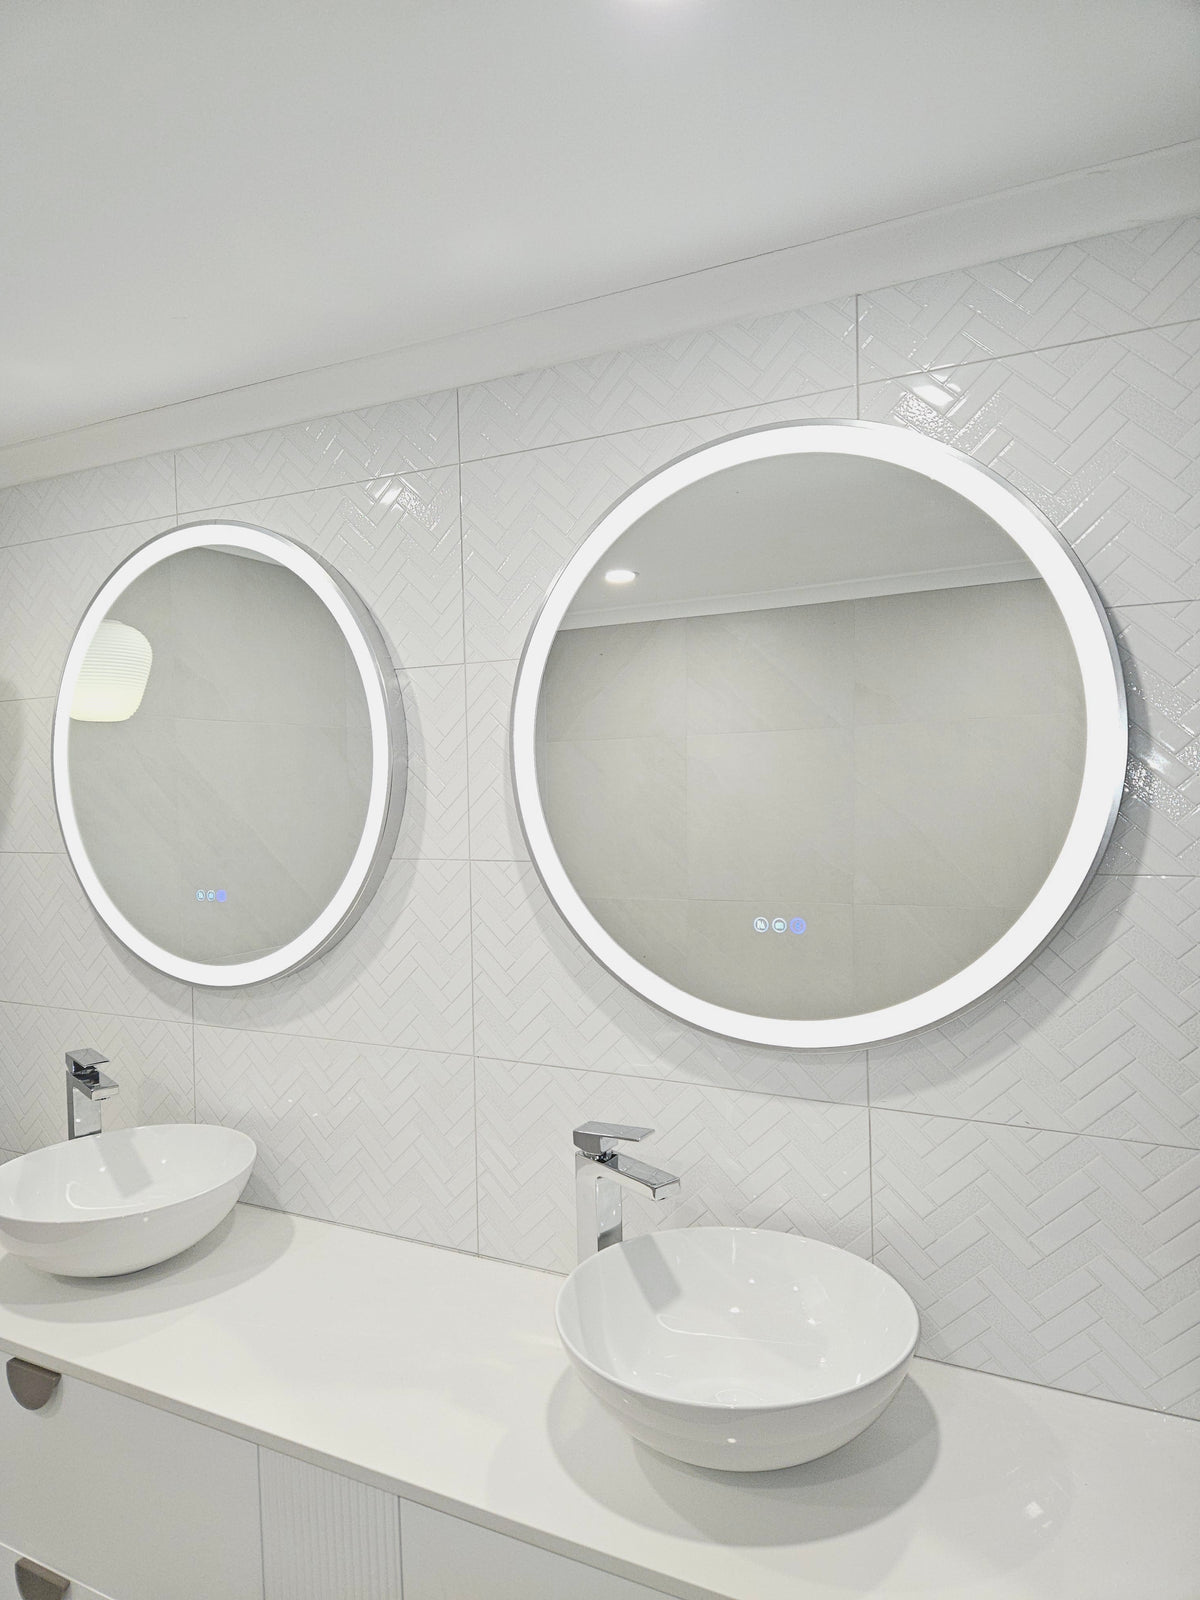 Doorway View of Two Silver Frame Circle Smart LED Mirrors in Couple's White-on-White Bathroom